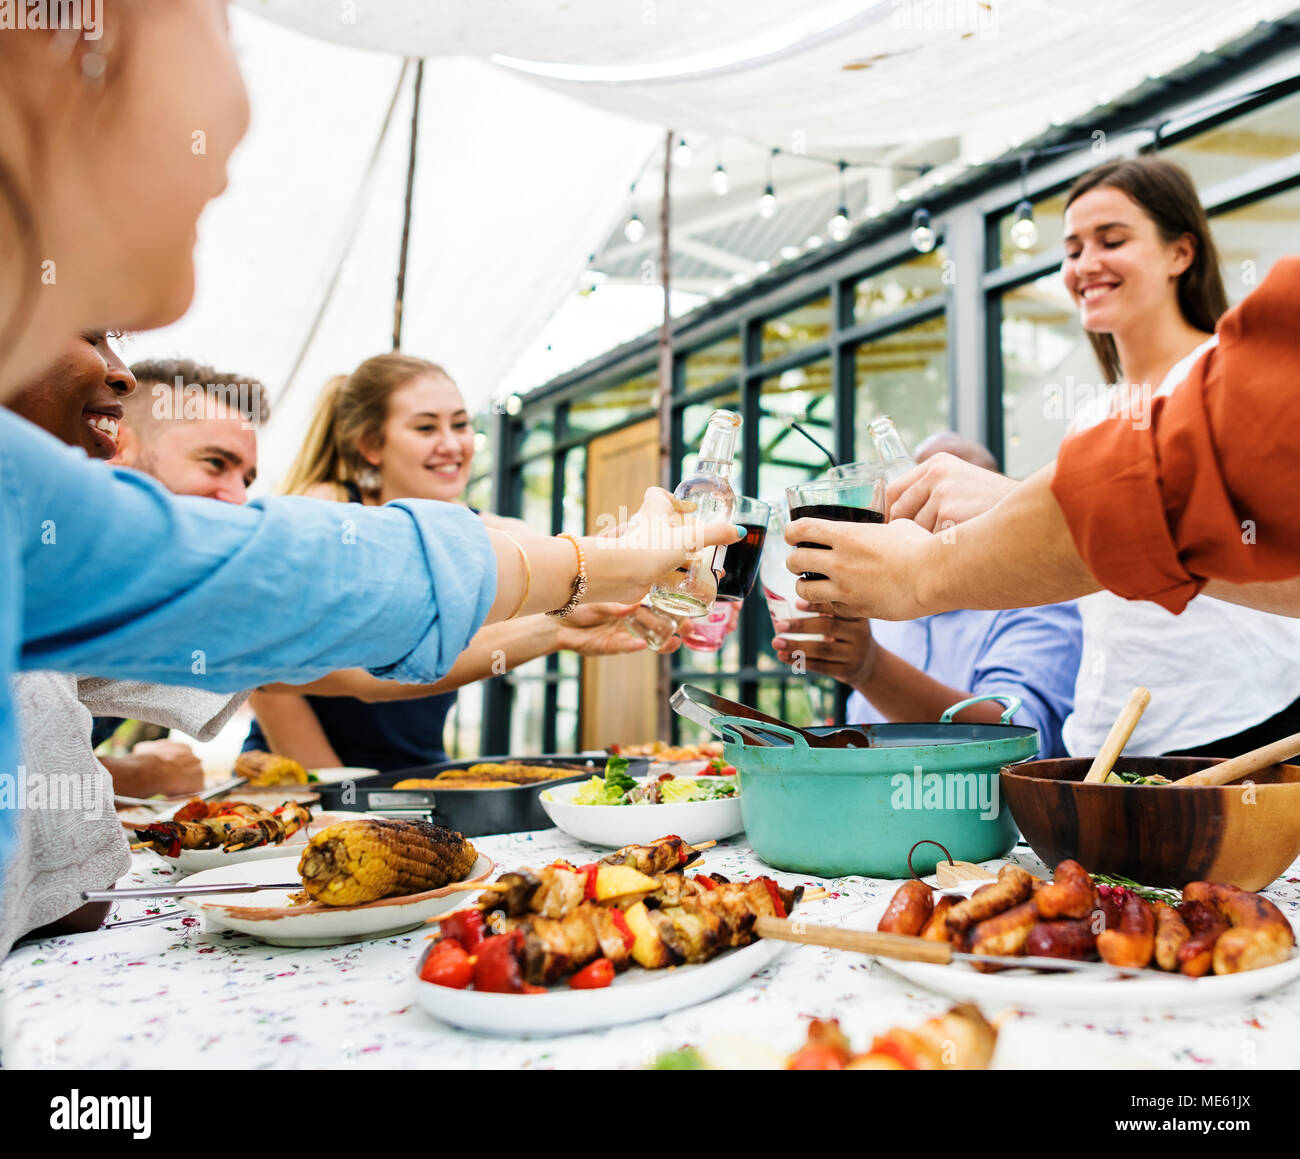 Group of diverse friends enjoying summer party together Stock Photo